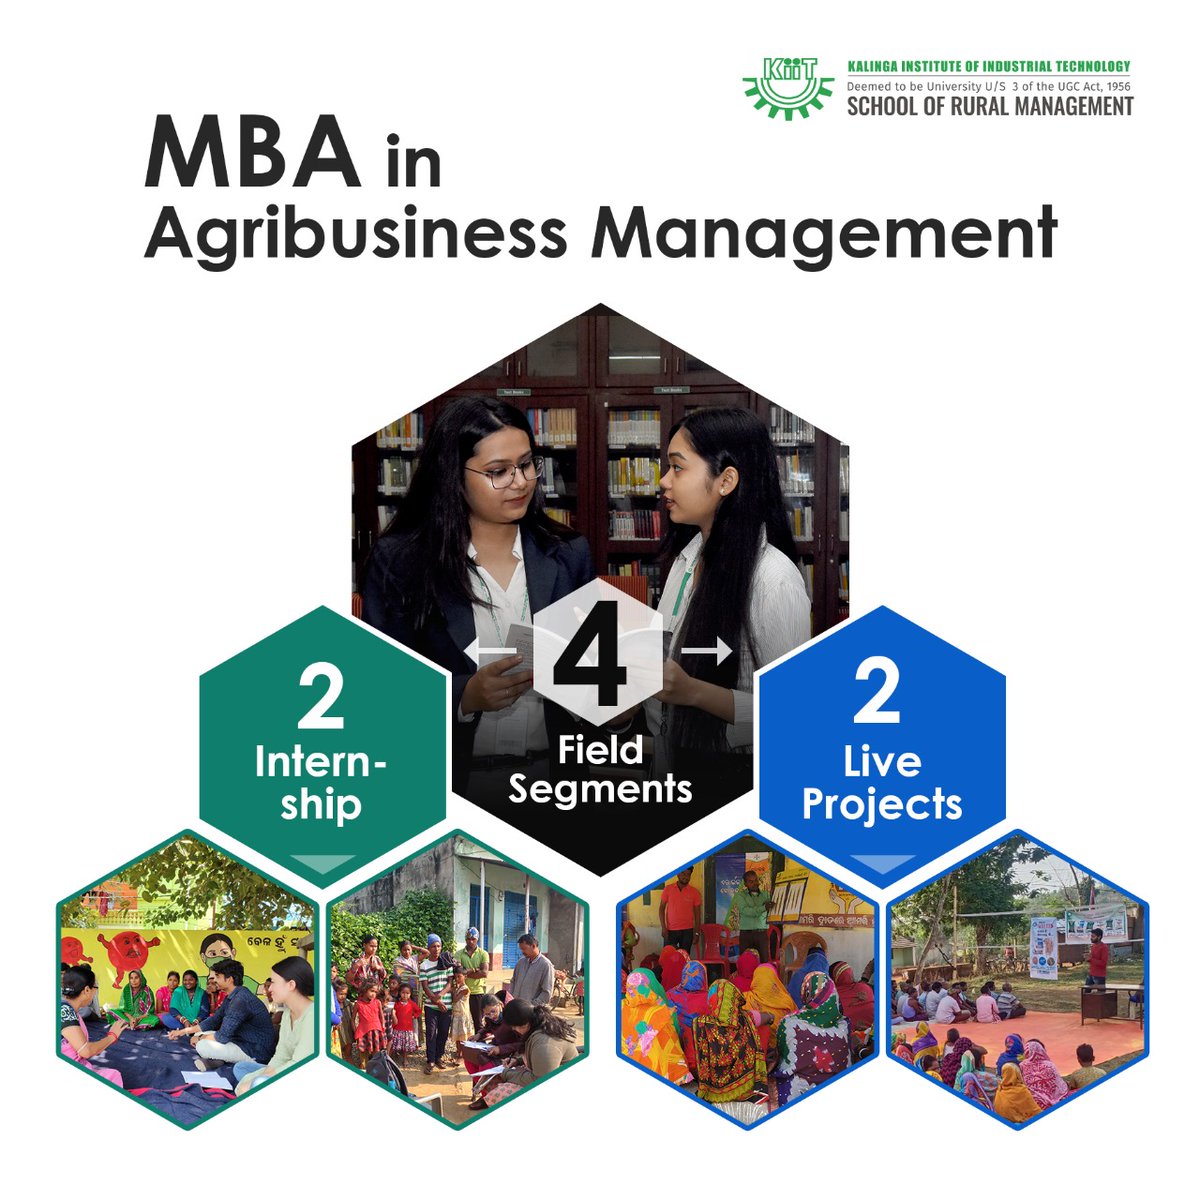 Did you know that the Agribusiness Management program at KSRM is the only one in the country to offer 4 Unique Field Segments/Internships/Live Projects as part of the curriculum? #ksrmbbsr #AgriBusinessManagement #experientiallearning #internships #Fieldsegments #LiveProjects